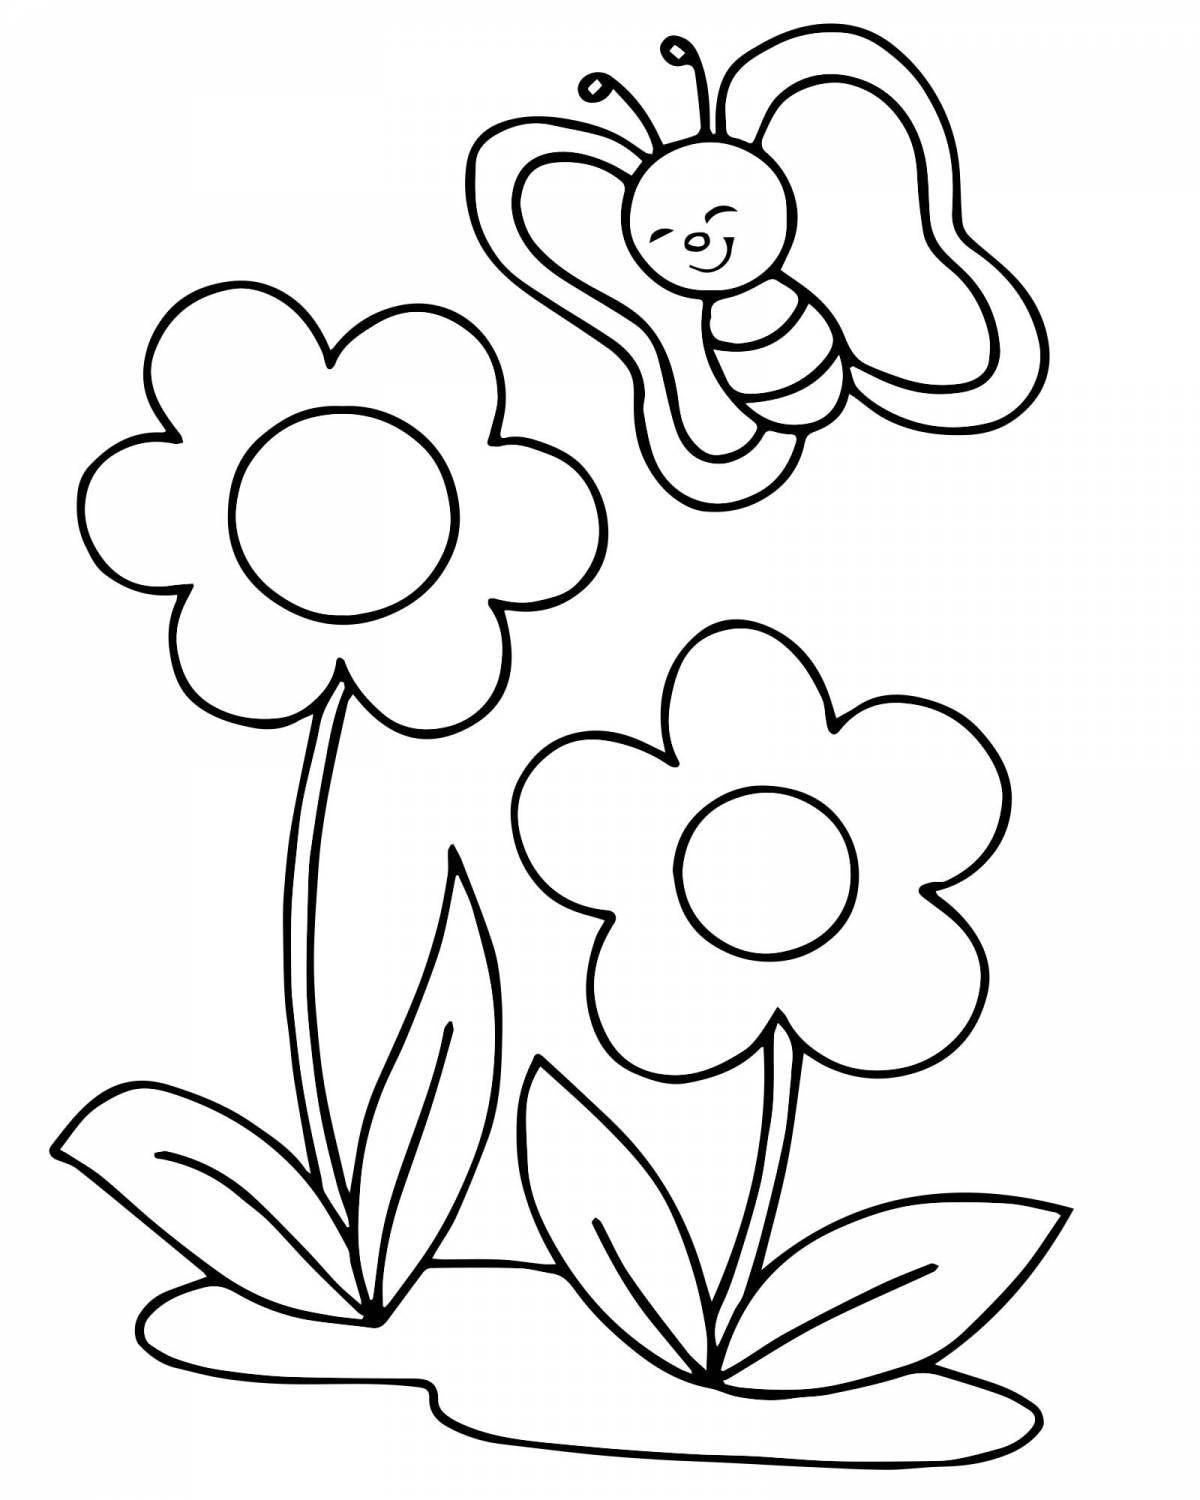 Serene flowers coloring book for 4-5 year olds